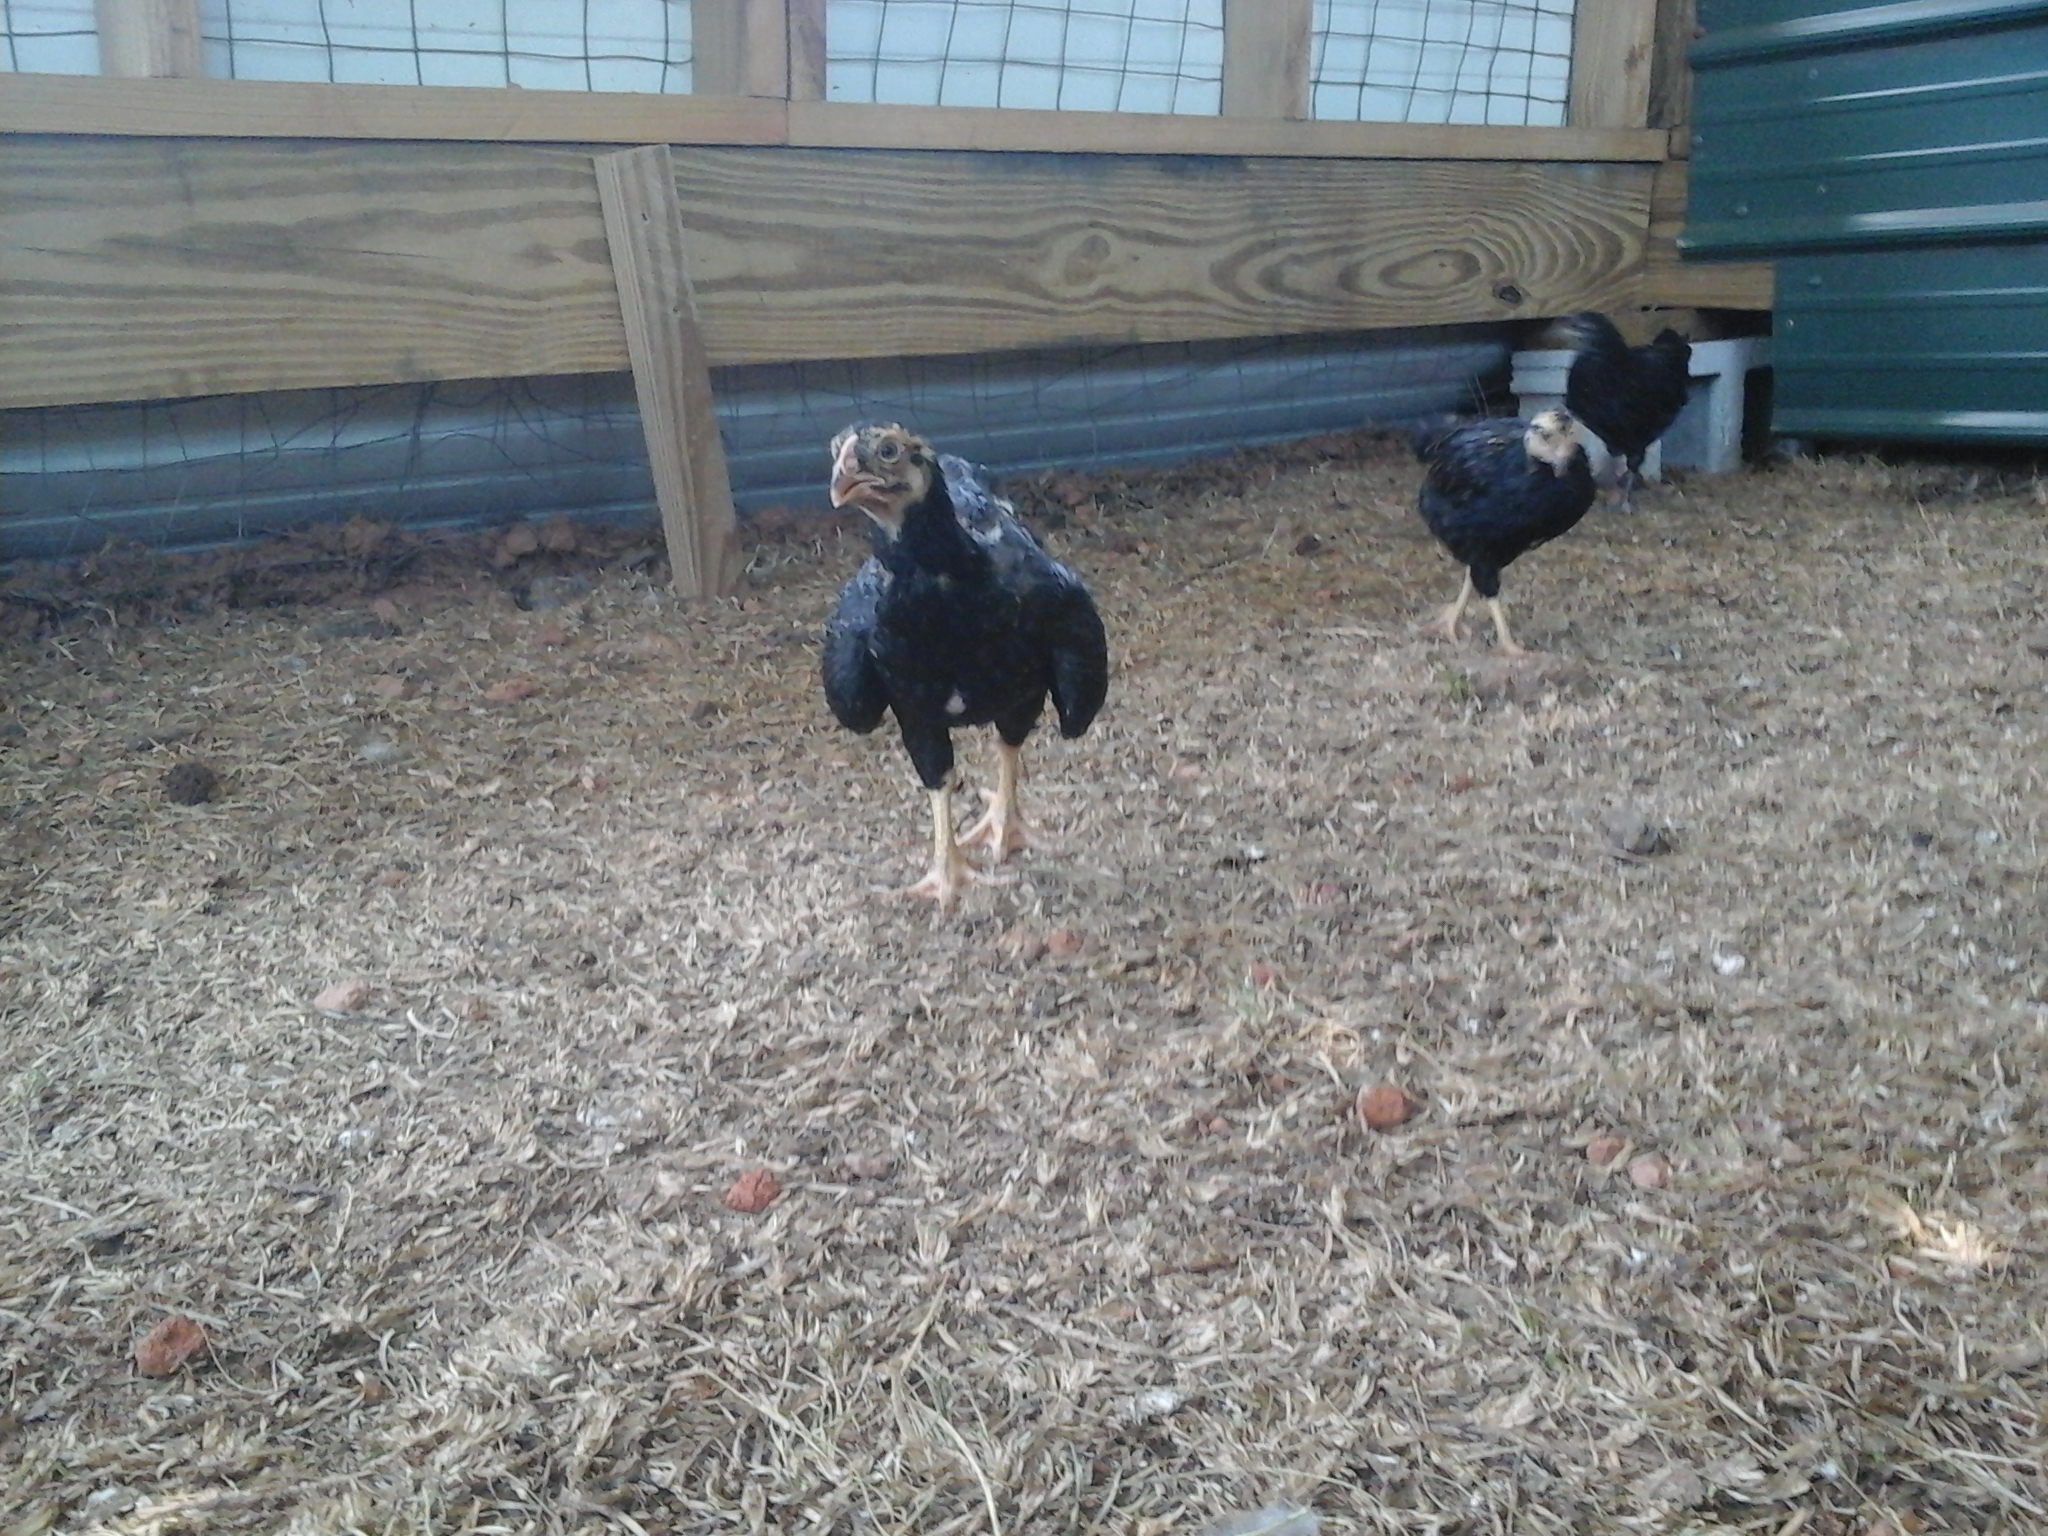 My dark Cornish rooster dark stripe with a pullet in the background